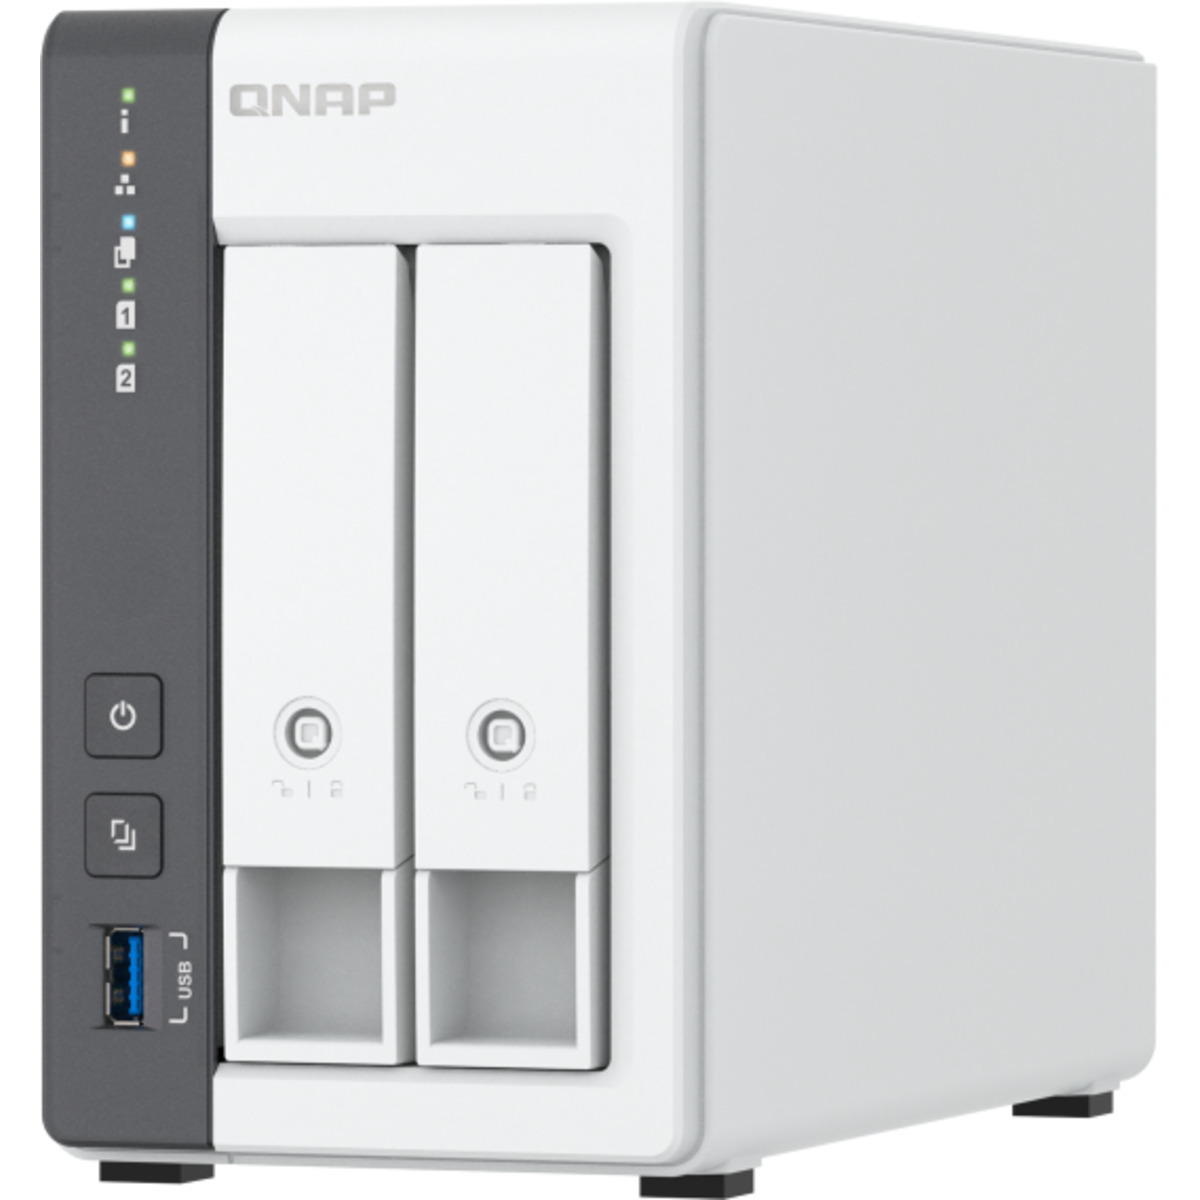 QNAP TS-216G 48tb 2-Bay Desktop Personal / Basic Home / Small Office NAS - Network Attached Storage Device 2x24tb Seagate IronWolf Pro ST24000NT002 3.5 7200rpm SATA 6Gb/s HDD NAS Class Drives Installed - Burn-In Tested TS-216G